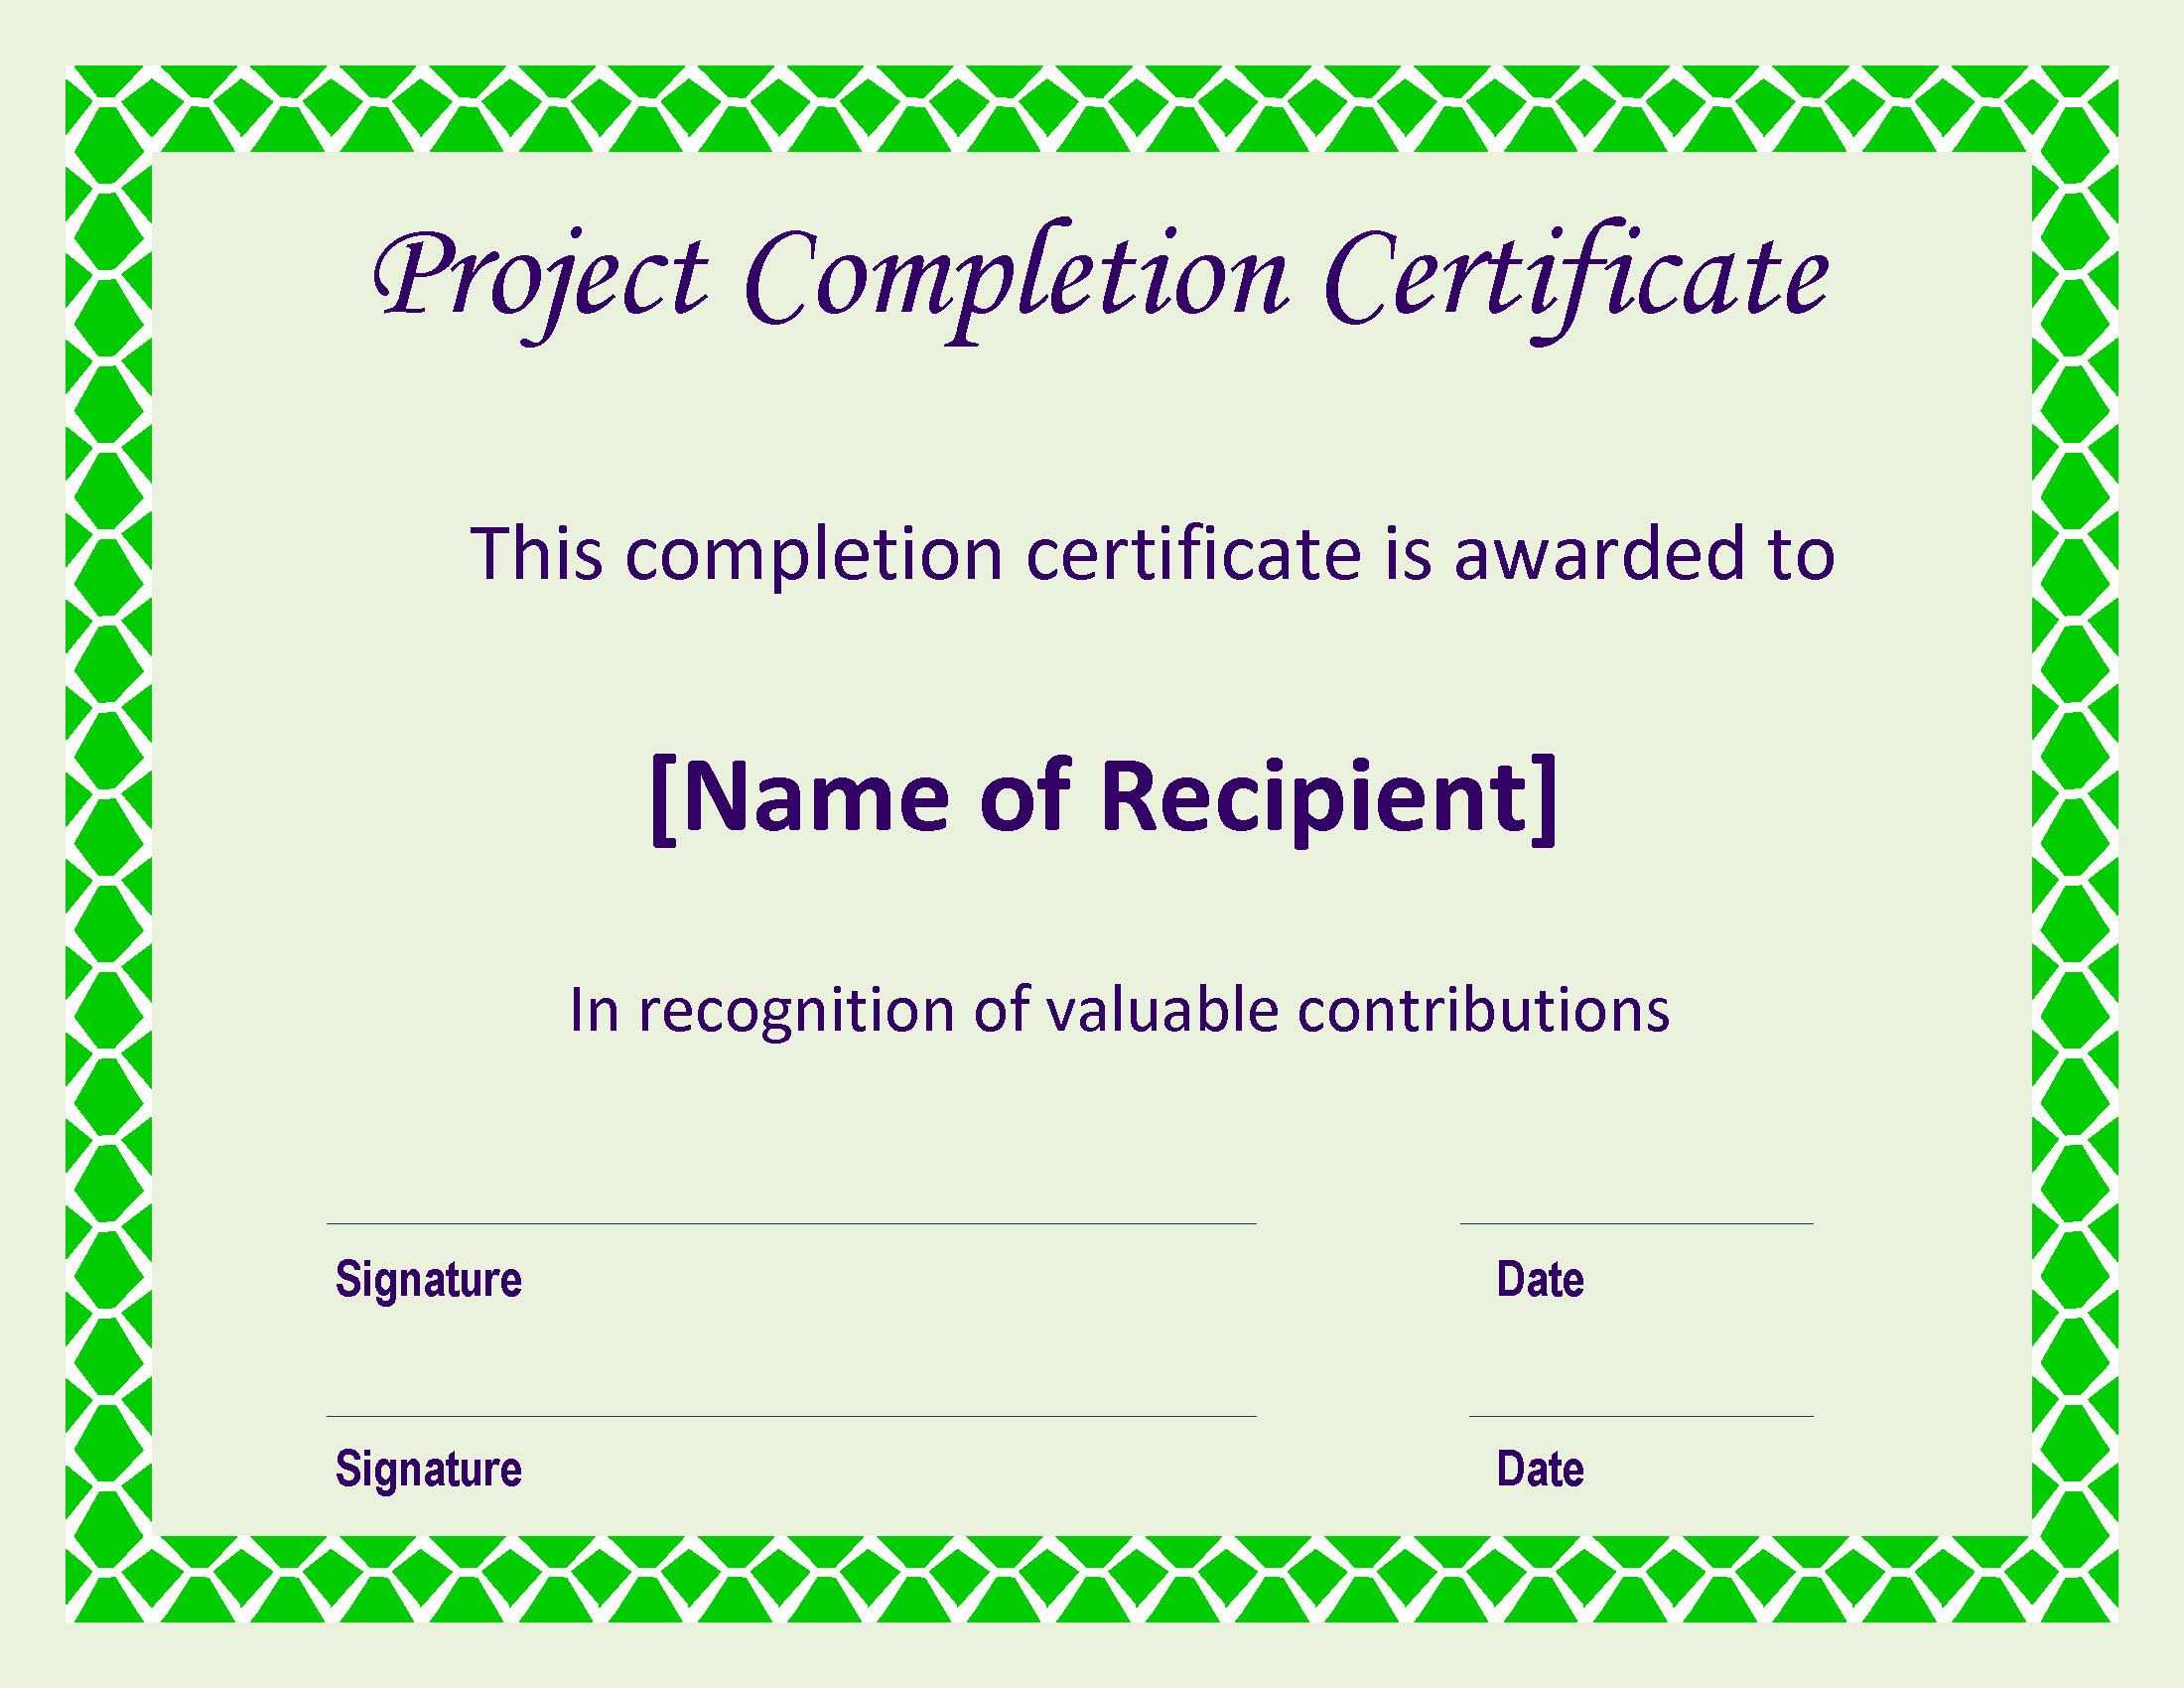 Certificate Of Completion Project | Templates At Throughout Certificate Of Completion Template Construction